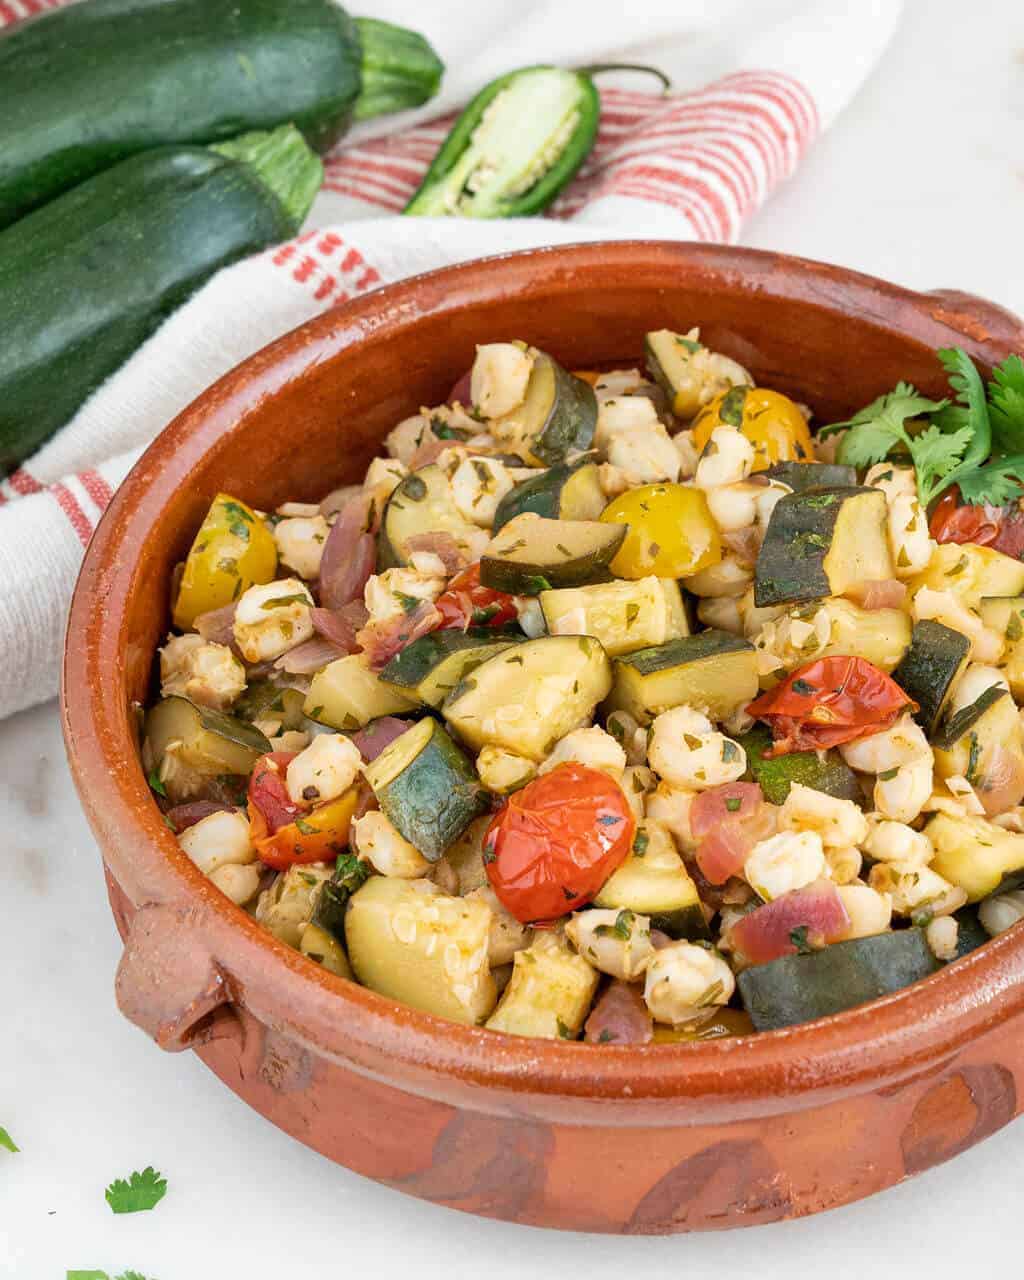 Summer zucchini and hominy salad in a brown serving bowl.